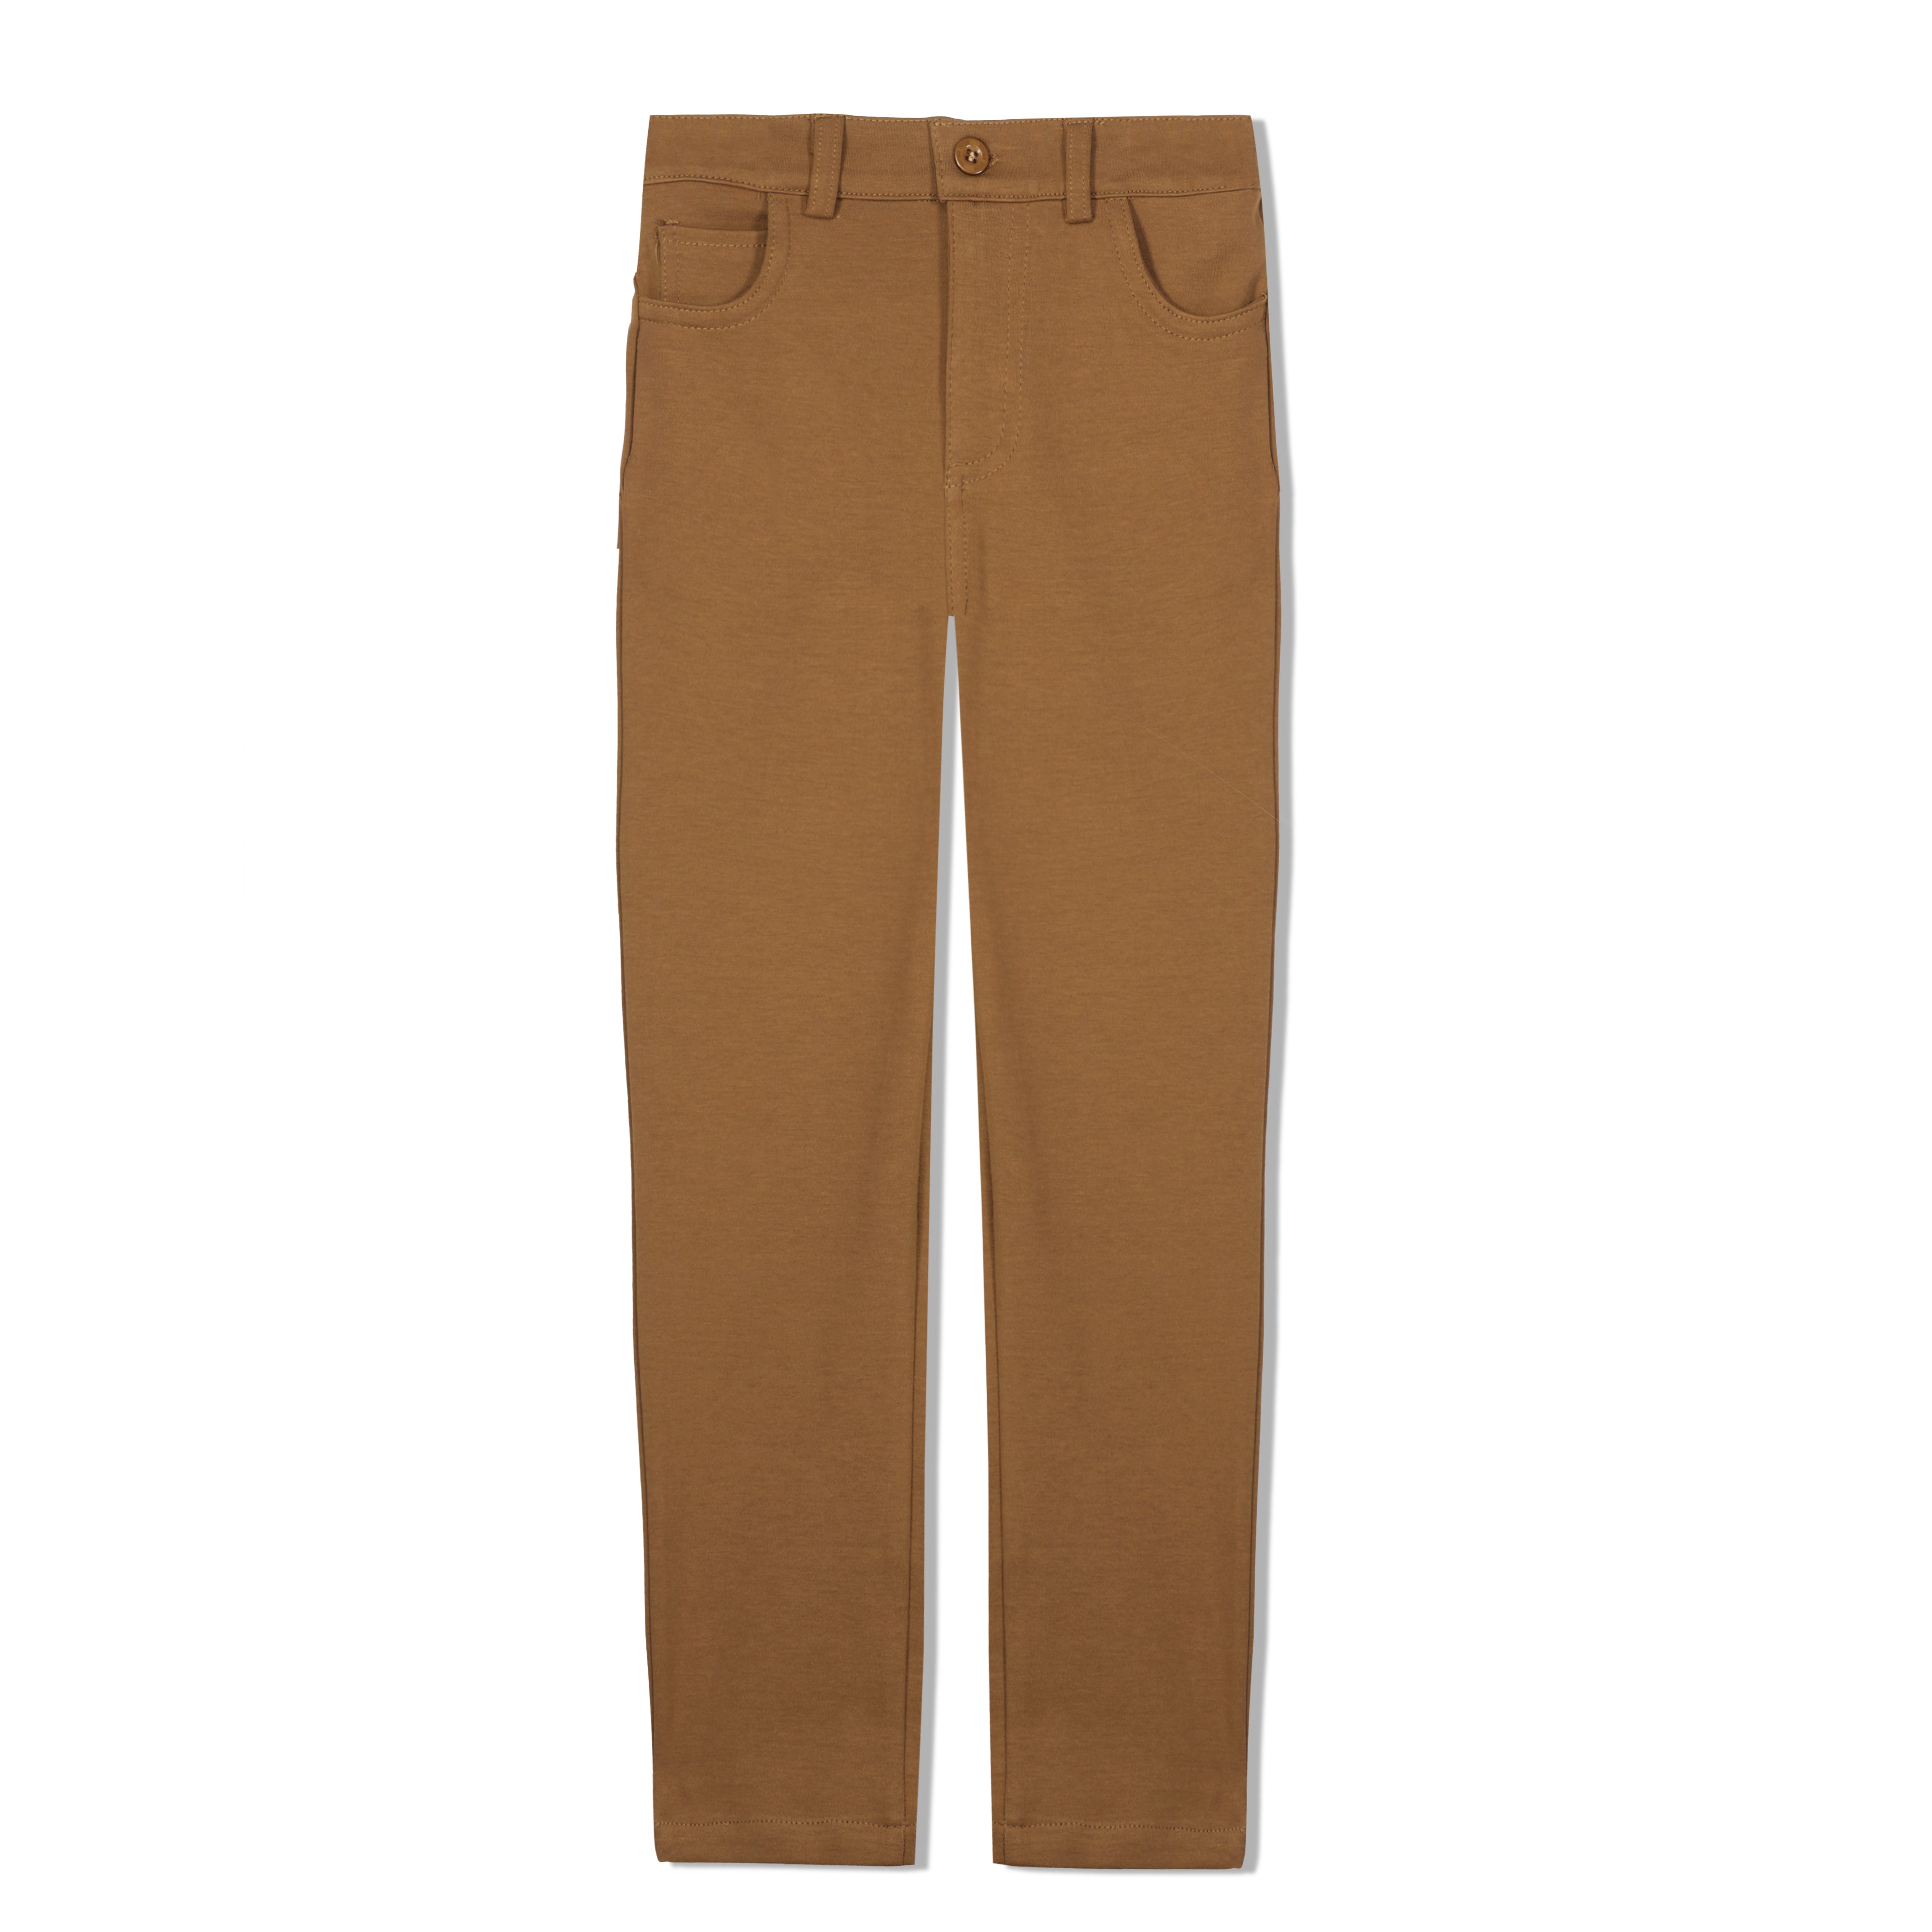 Softest Cotton Pants- Toffee